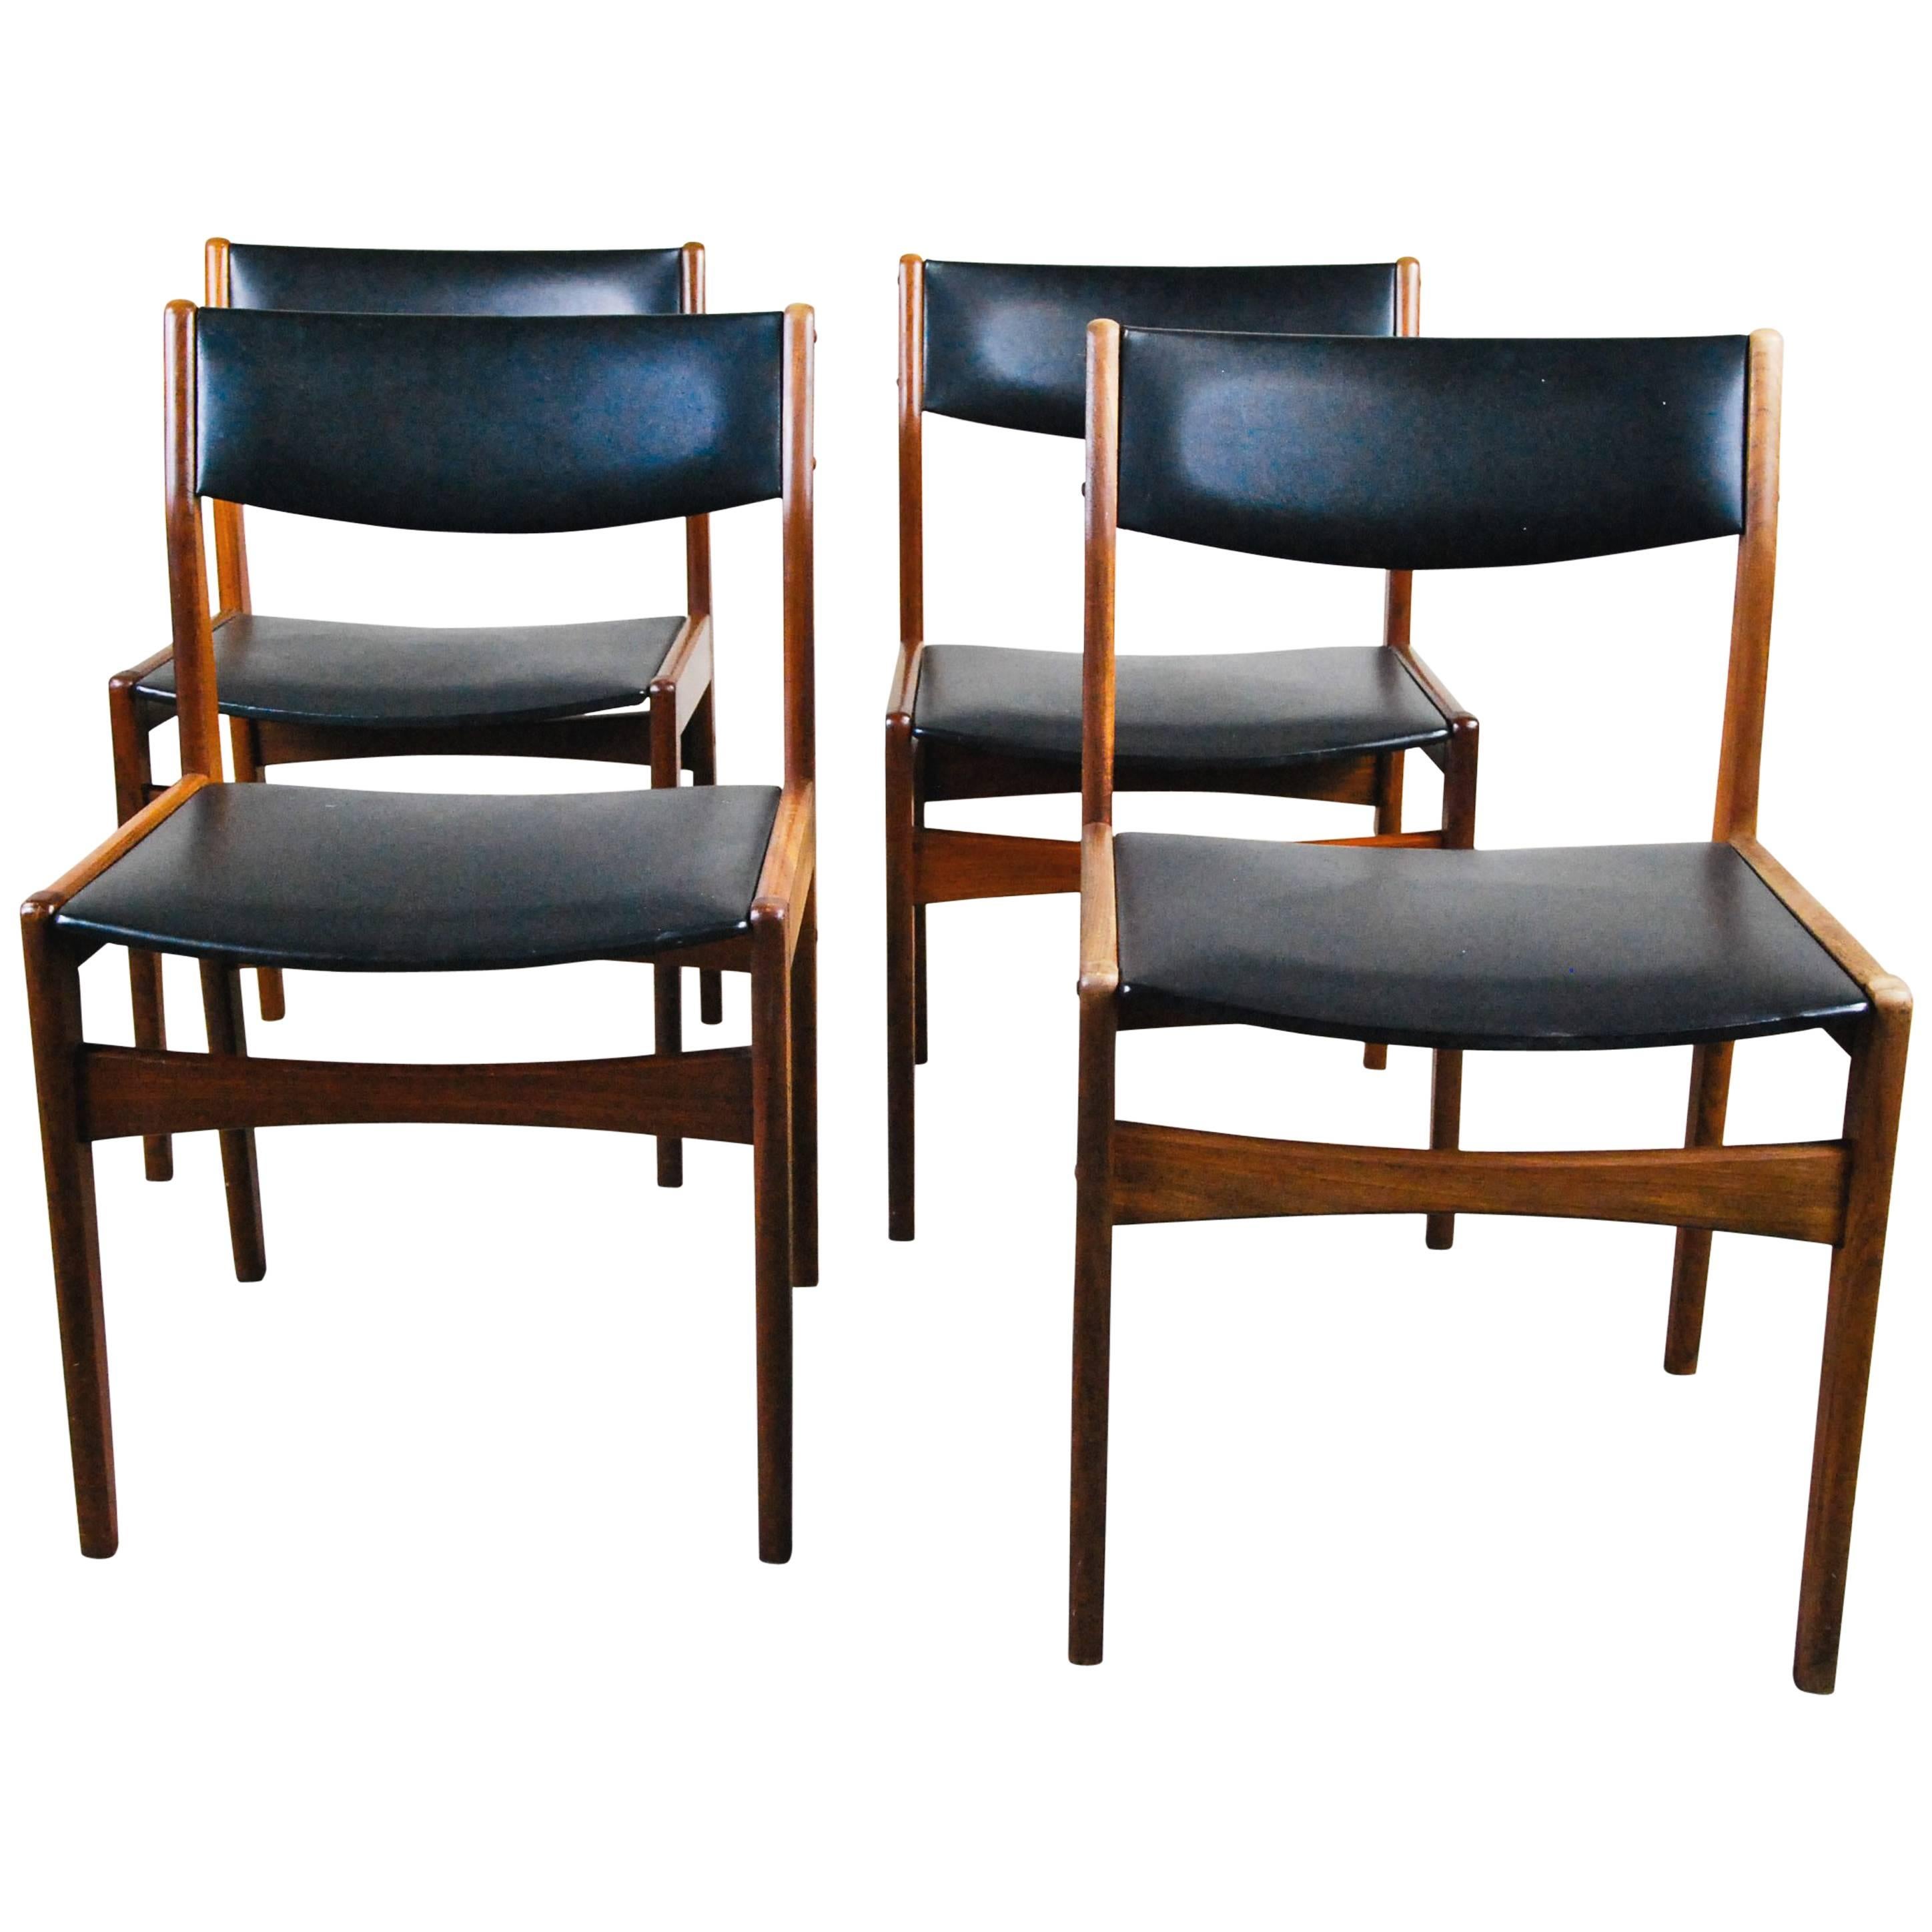 1960 Danish Teak Dining Chairs by Poul Volther for Frem Rojle